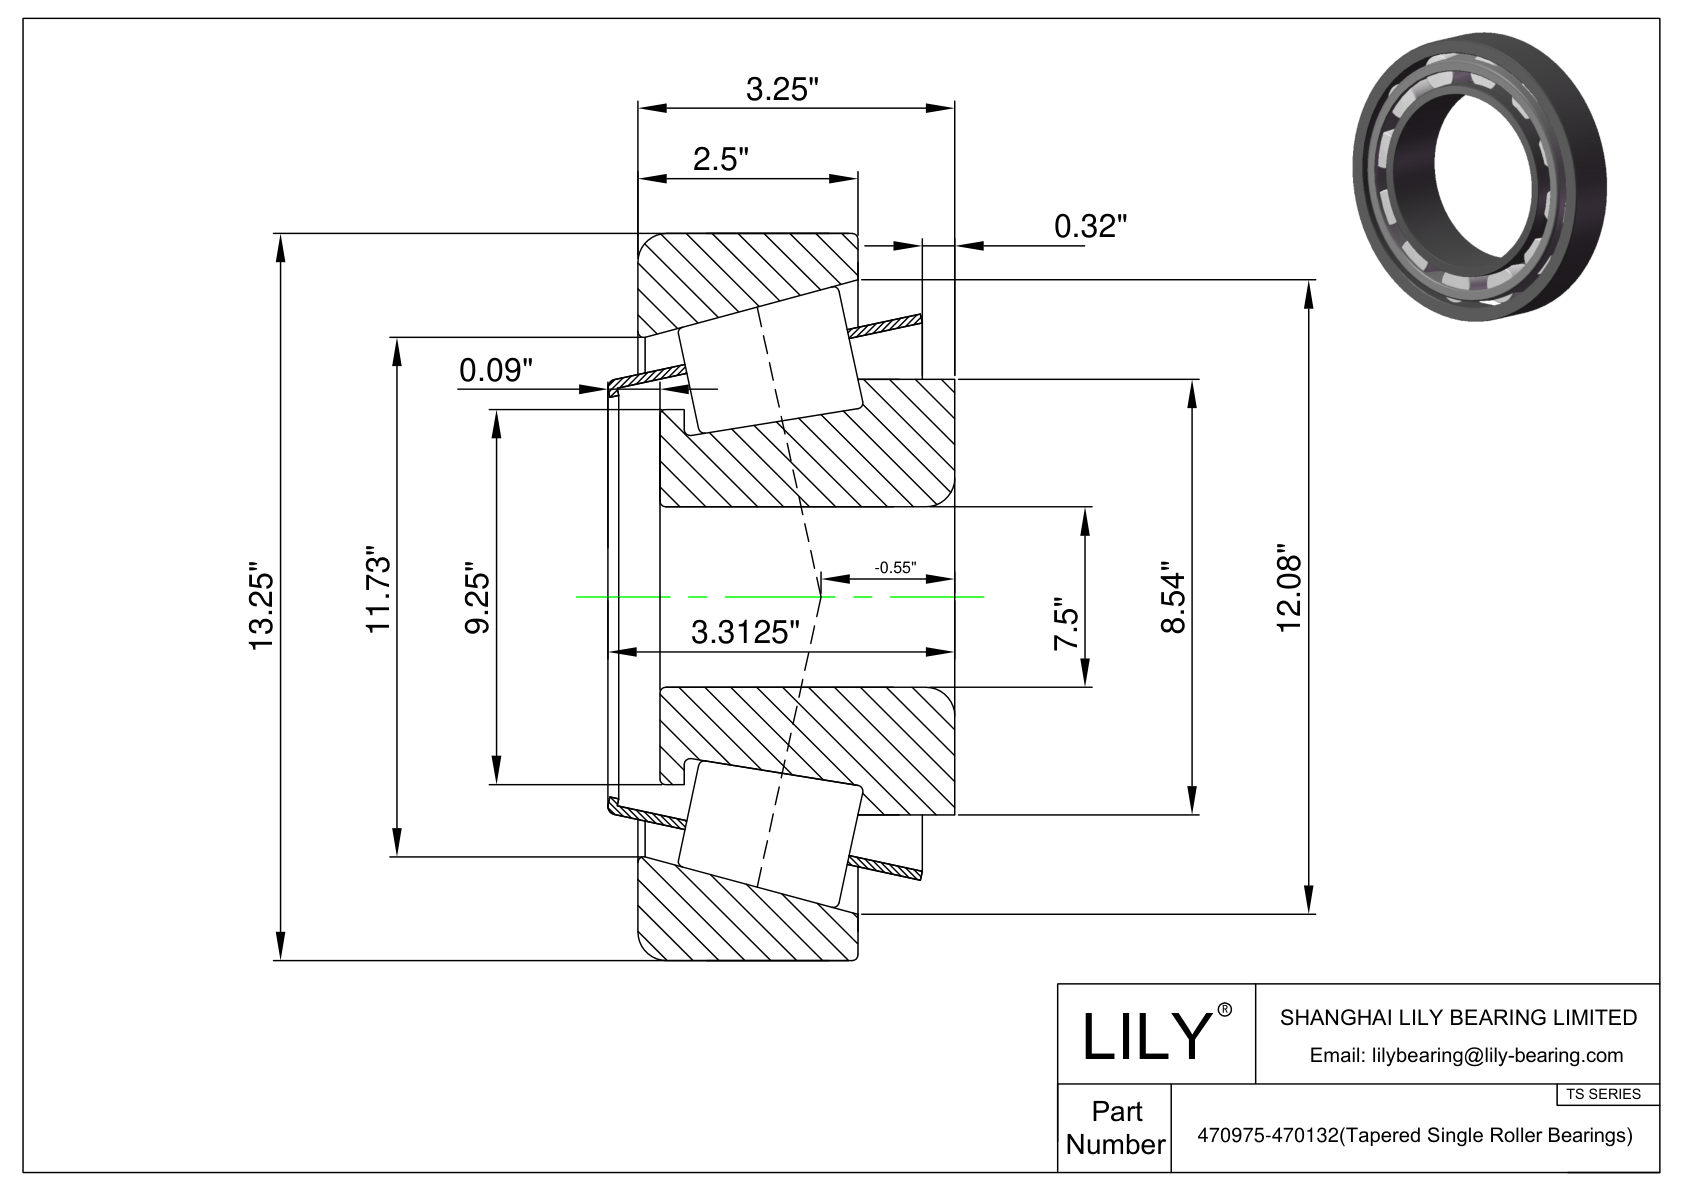 470975-470132 TS (Tapered Single Roller Bearings) (Imperial) cad drawing